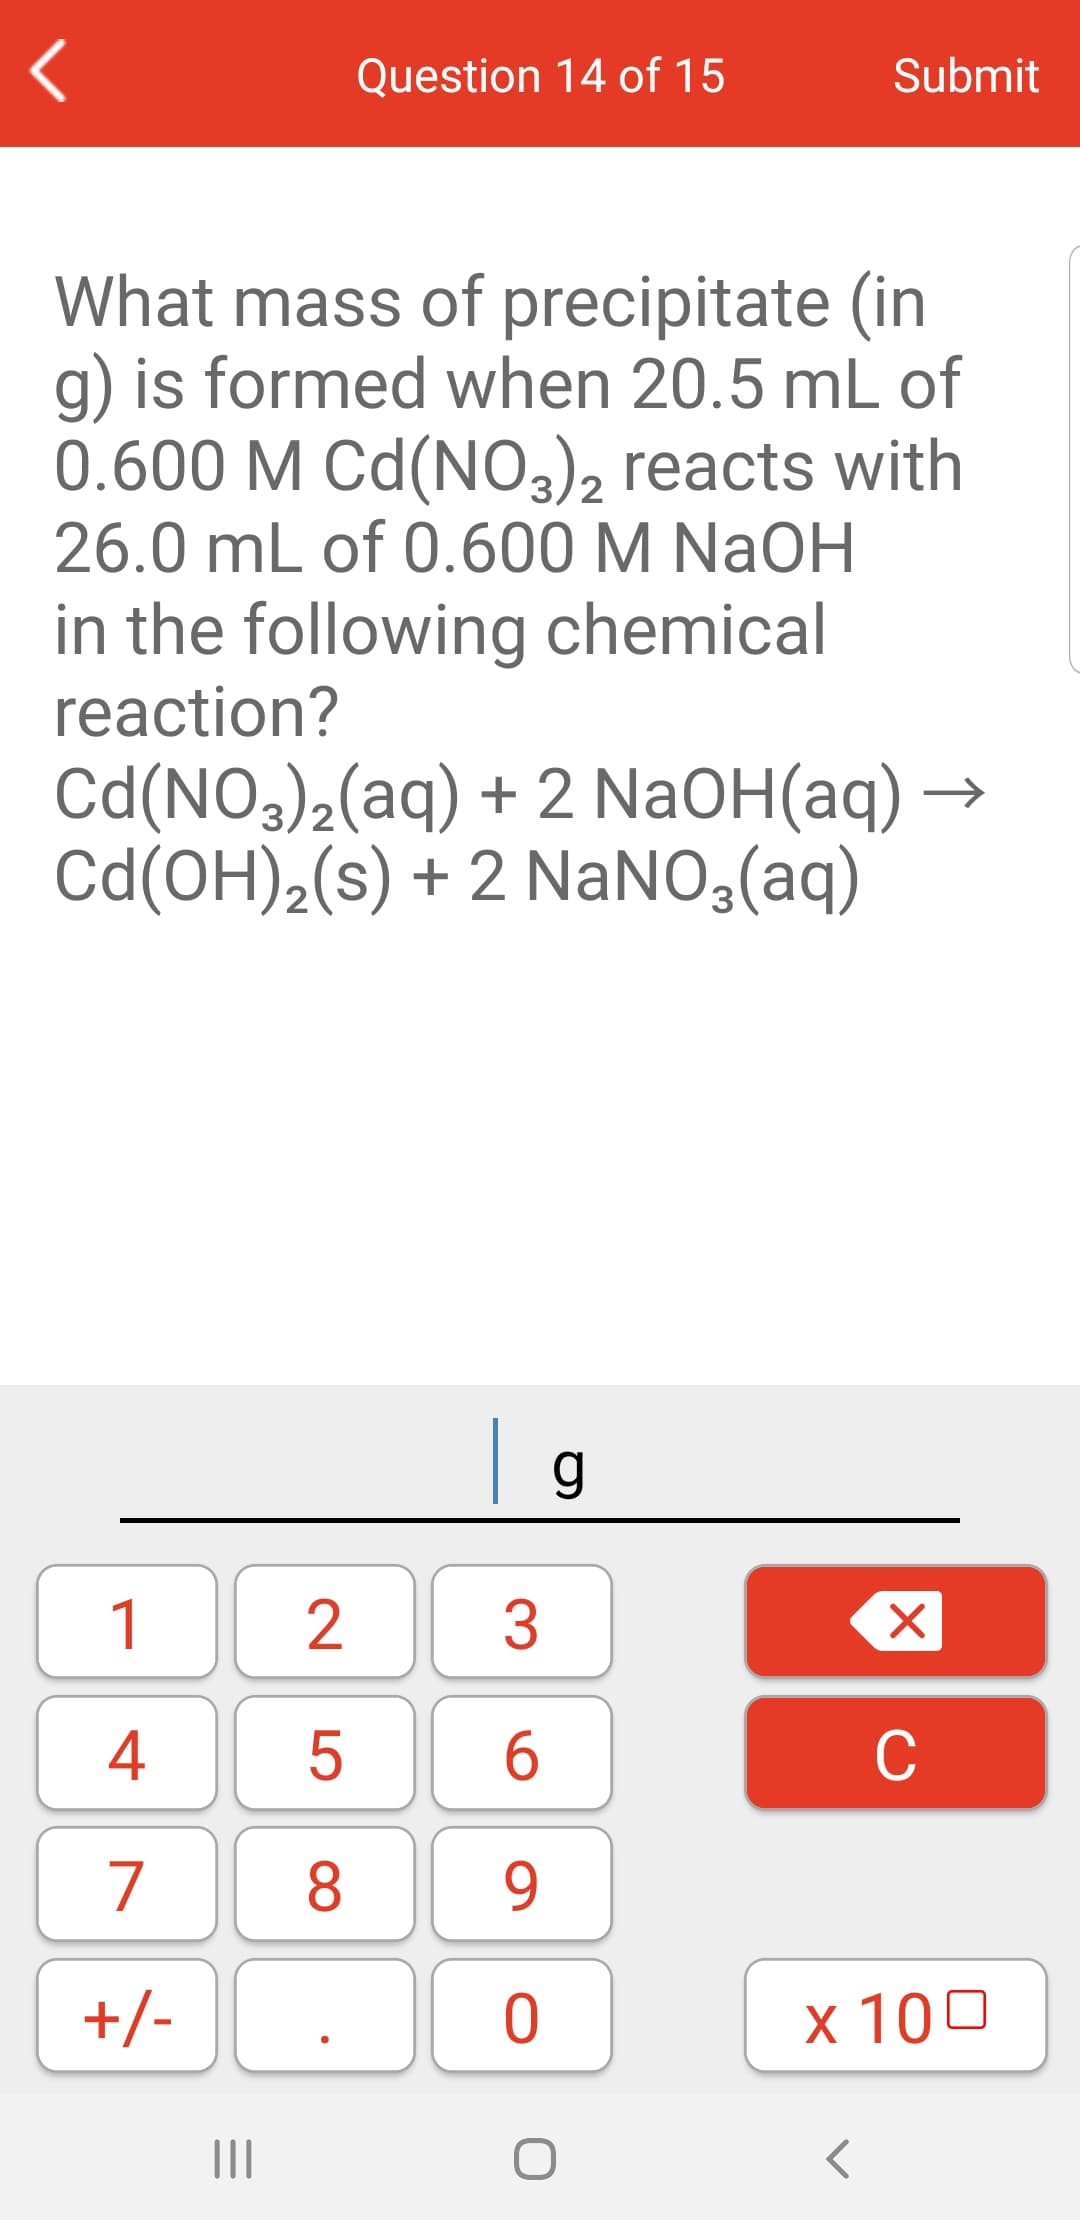 Question 14 of 15
Submit
What mass of precipitate (in
g) is formed when 20.5 mL of
0.600 M Cd(NO32), reacts with
26.0 mL of 0.600 M NaOH
3/2
in the following chemical
reaction?
Cd(NO3),(aq) + 2 NaOH(aq) –
Cd(OH),(s) + 2 NaNO,(aq)
g
1
2
3
4
C
7
8
9
+/-
х 100
II
|X
